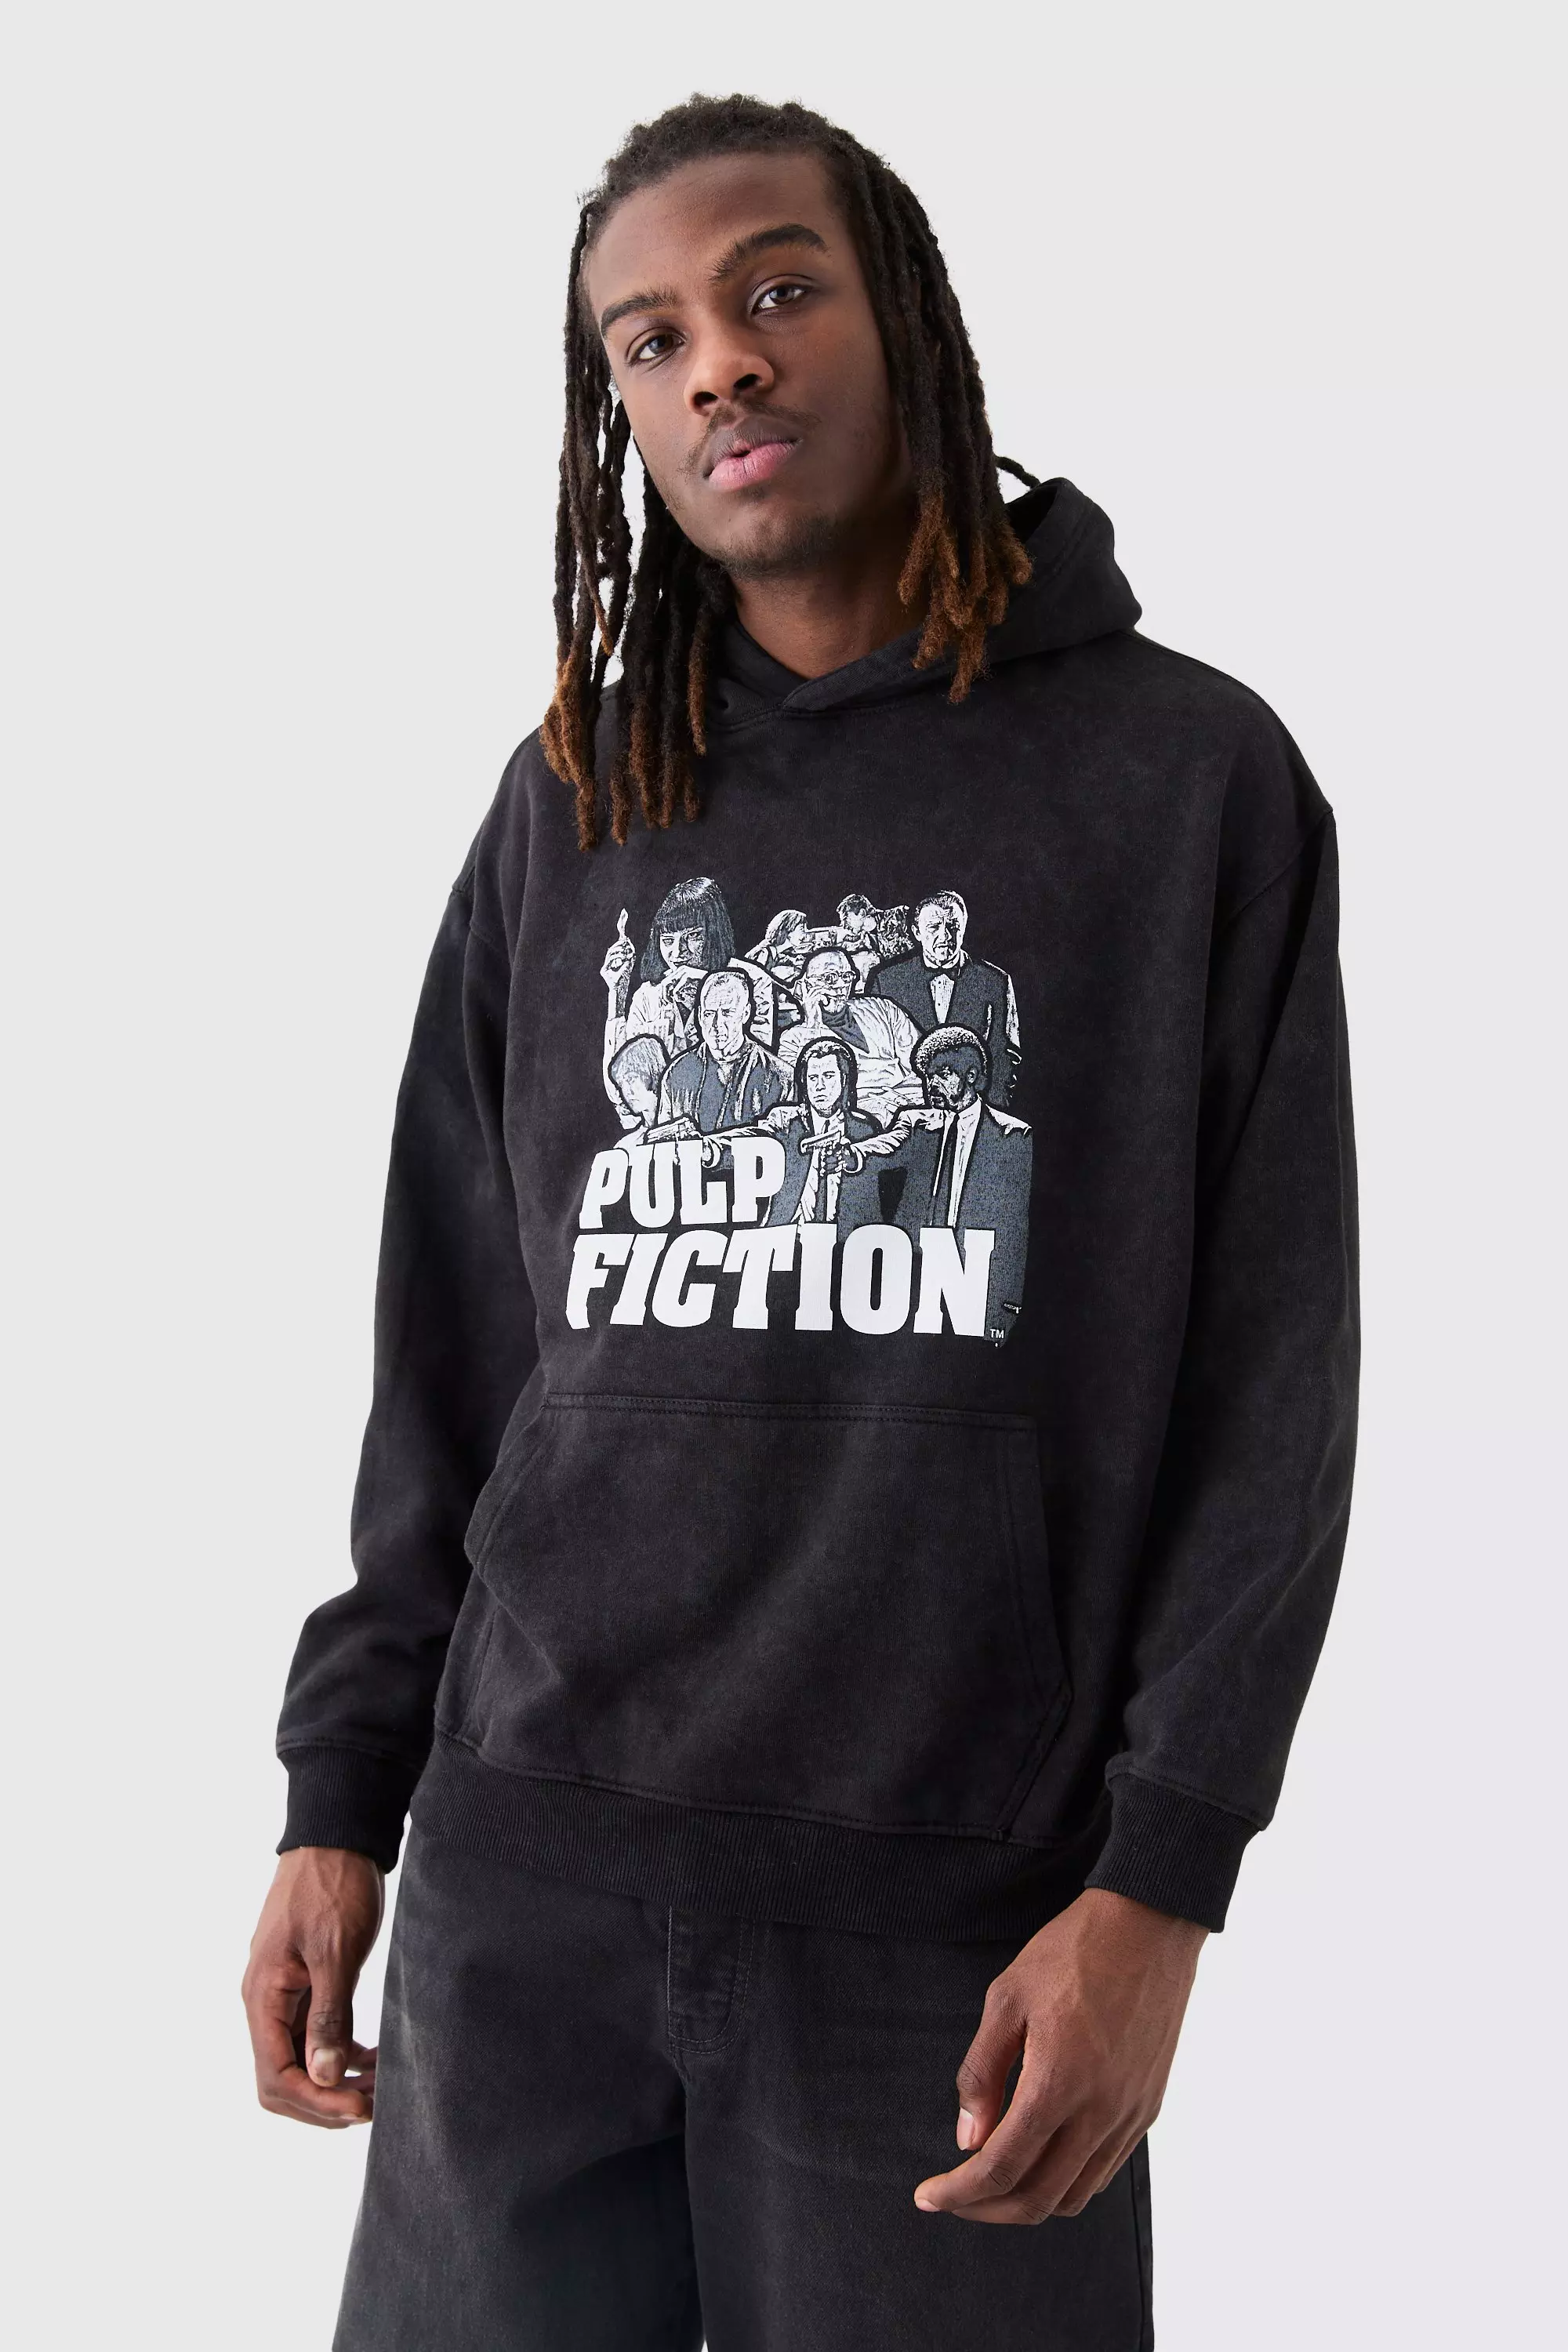 Charcoal Grey Oversized Overdye Pulp Fiction License Hoodie